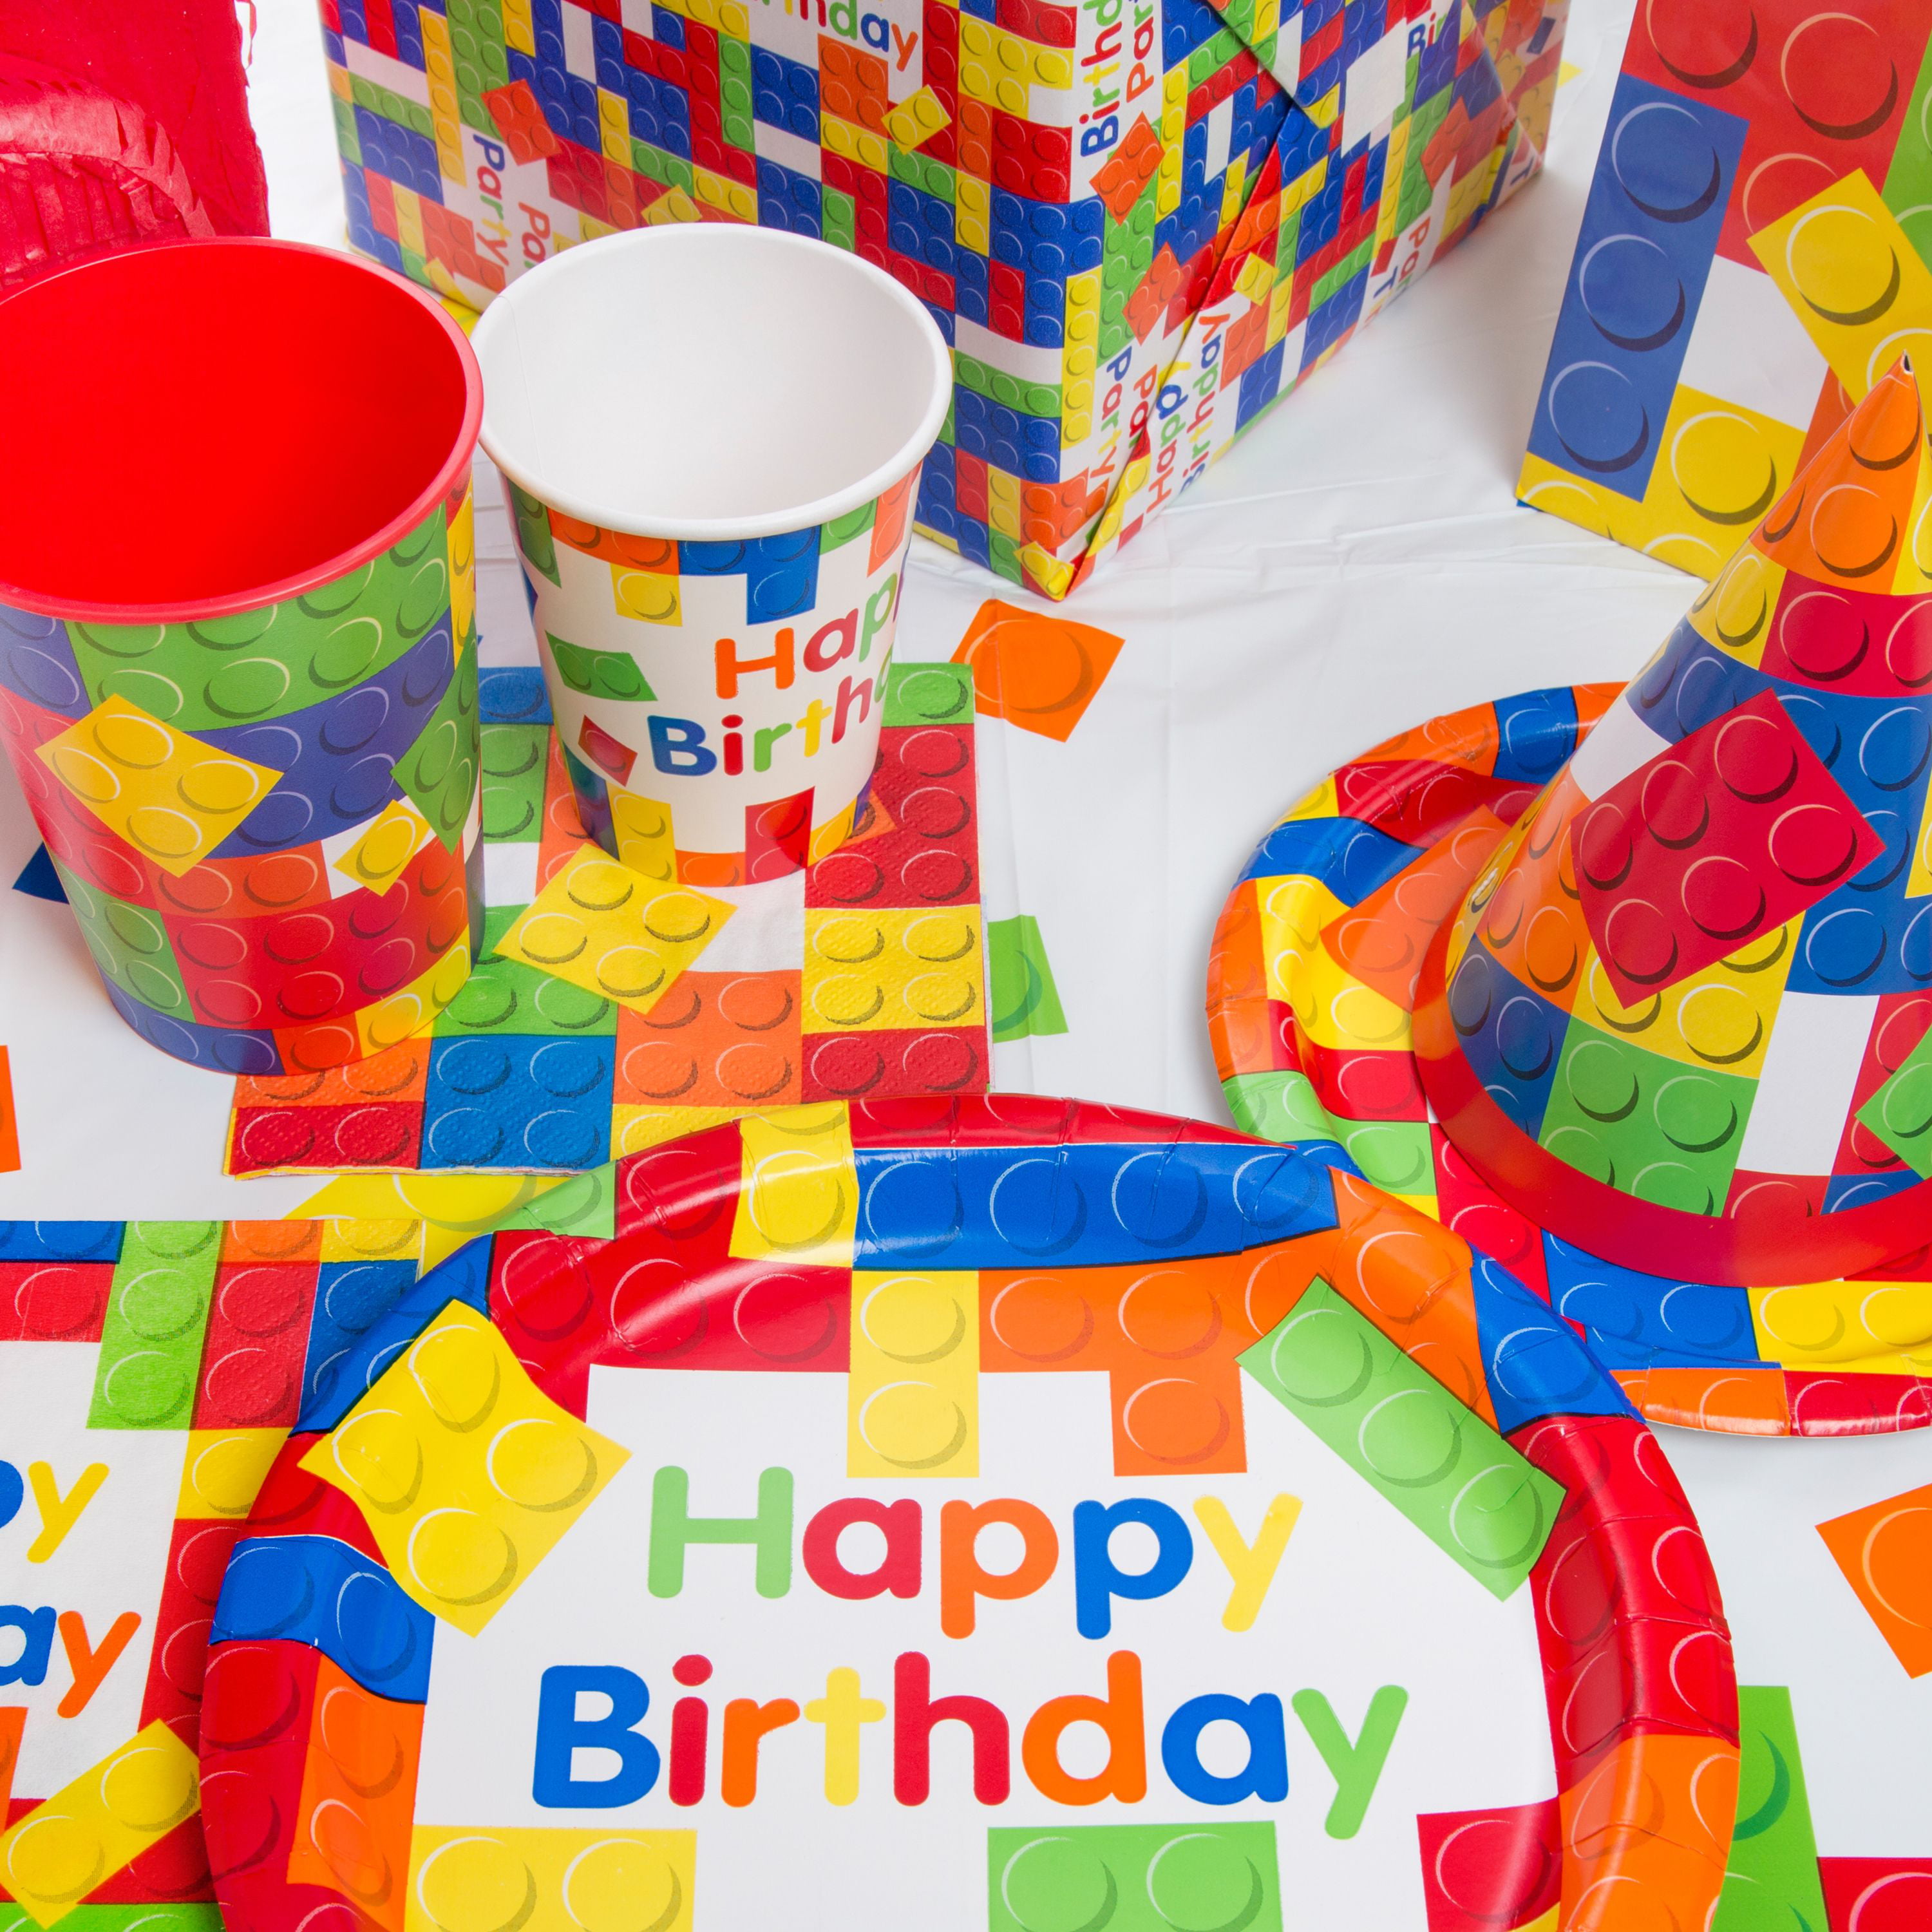 Building Blocks, Red Blue Green Yellow Bricks Wrapping Paper by Lilonet